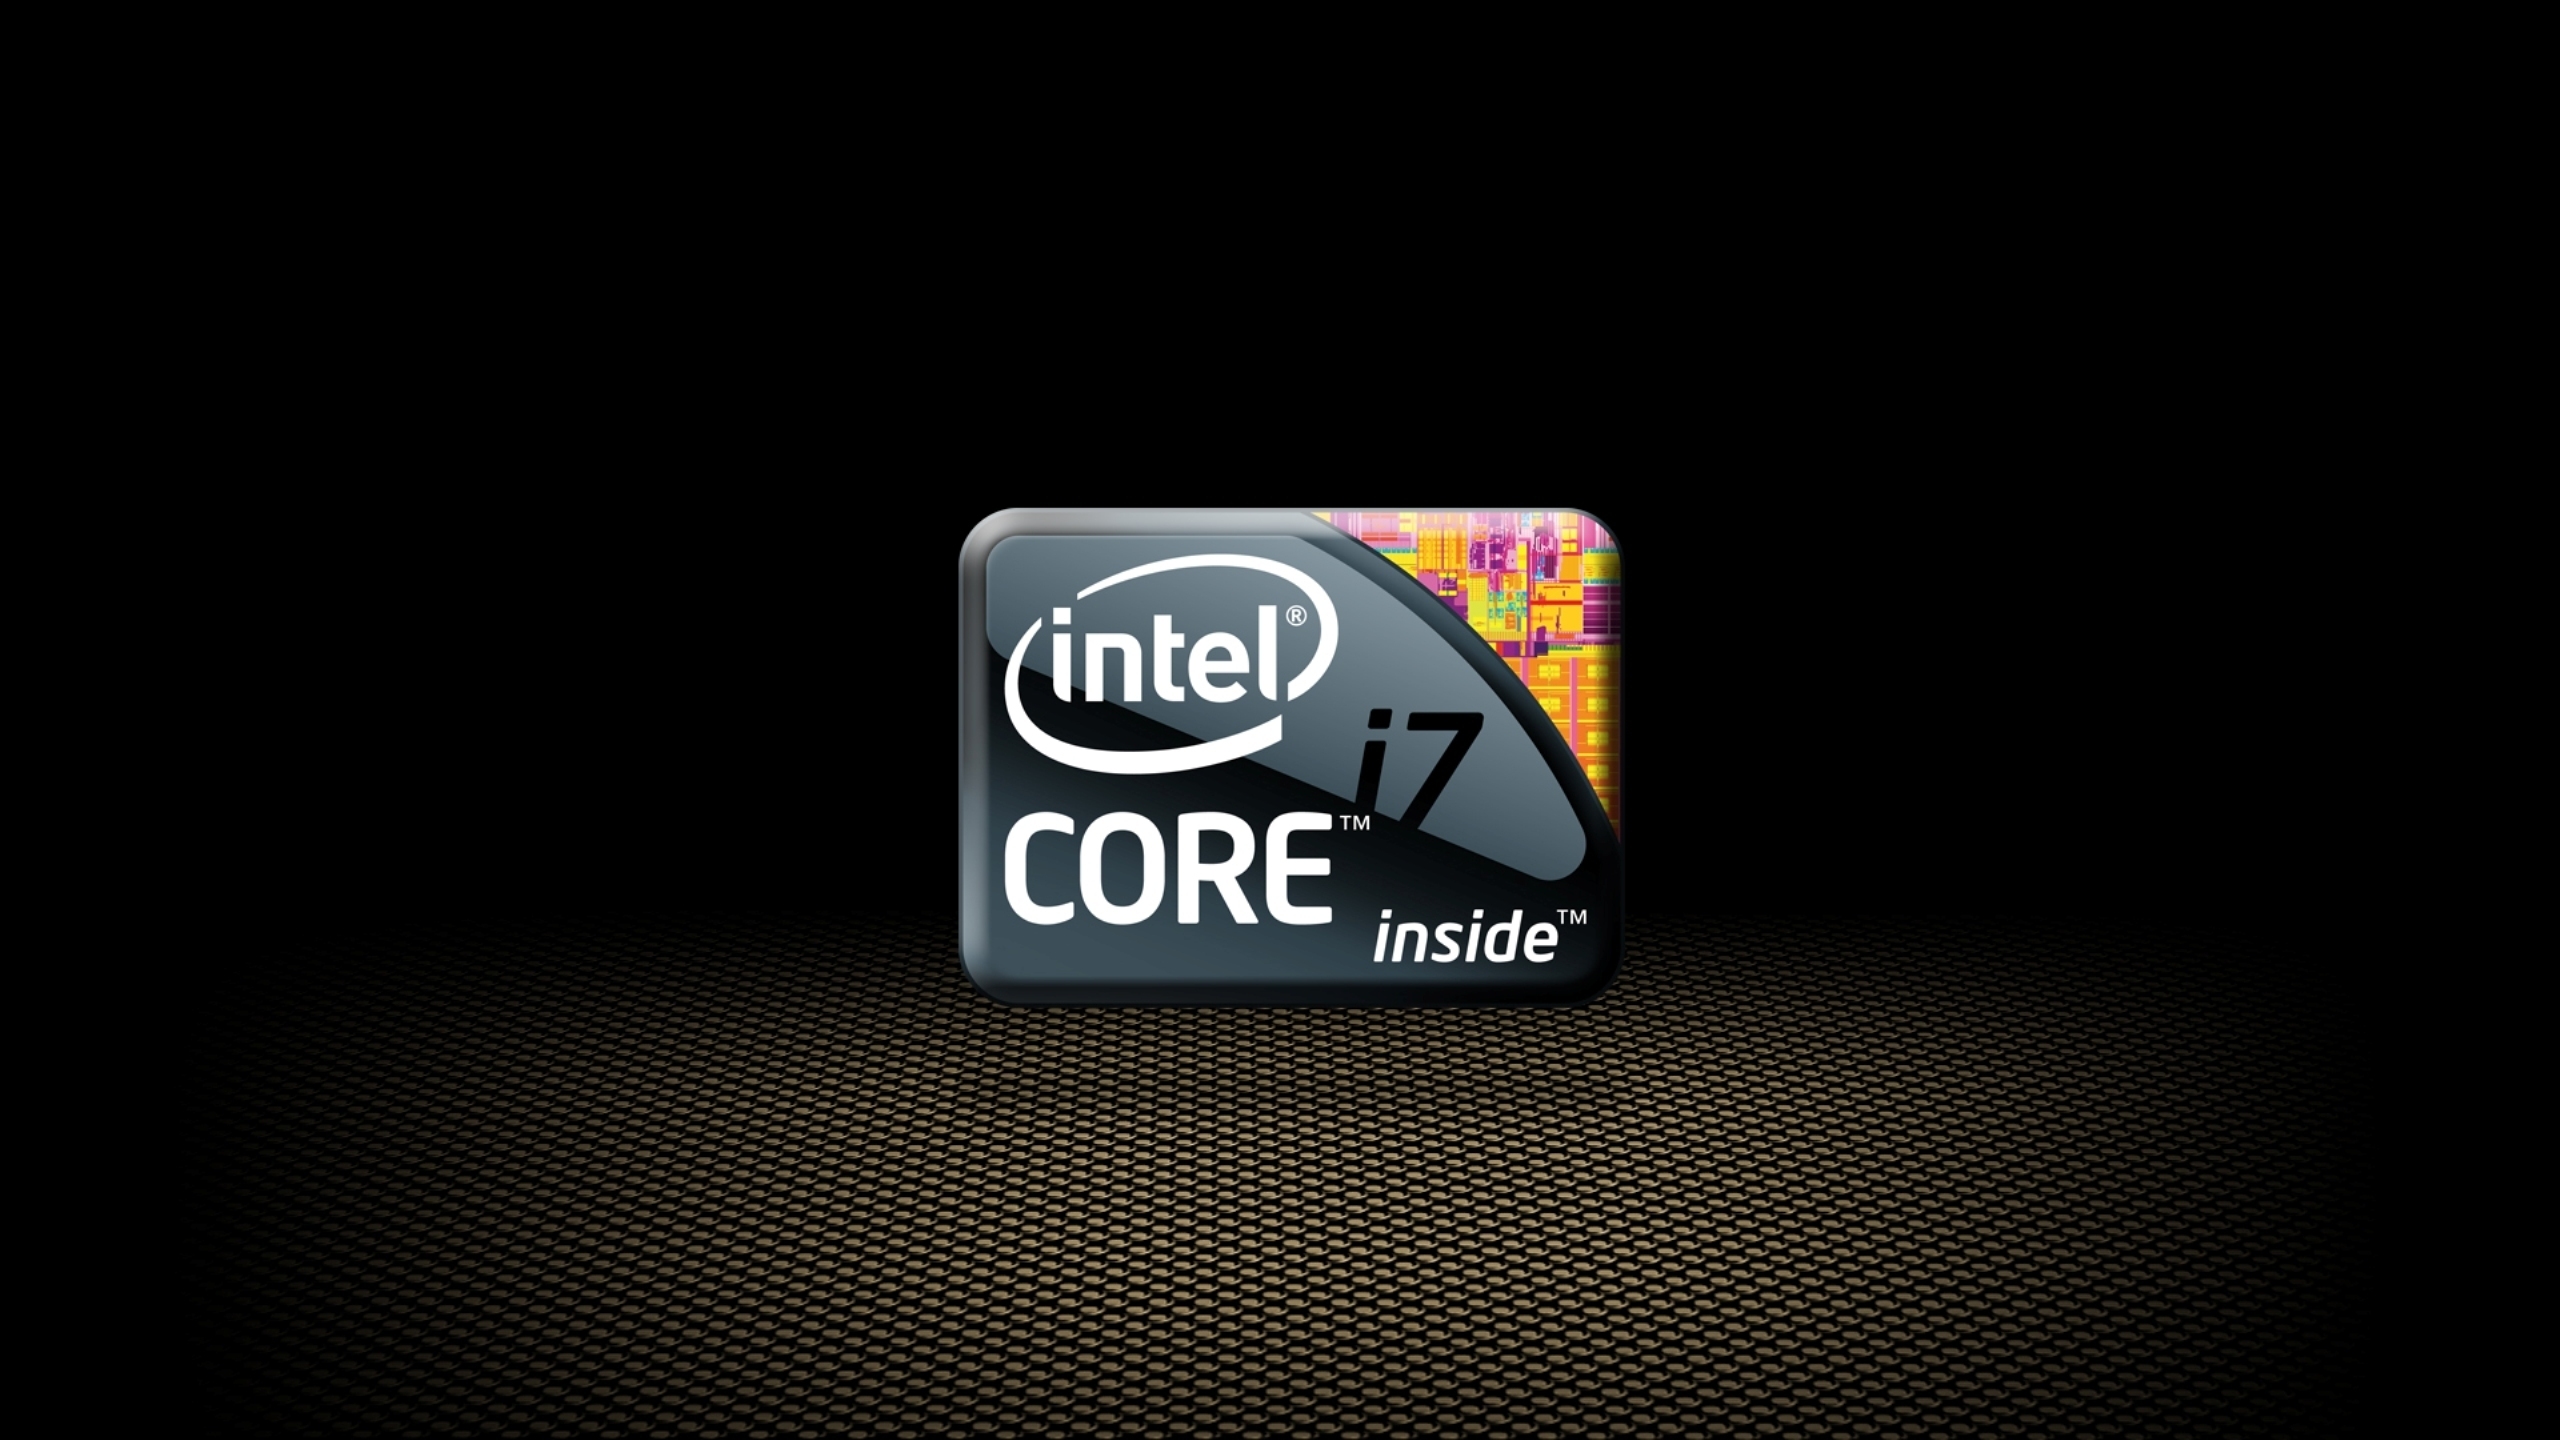 2560x1440 Intel Processor Gray 1440p Resolution Wallpaper Hd Hi Tech 4k Wallpapers Images Photos And Background Wallpapers Den